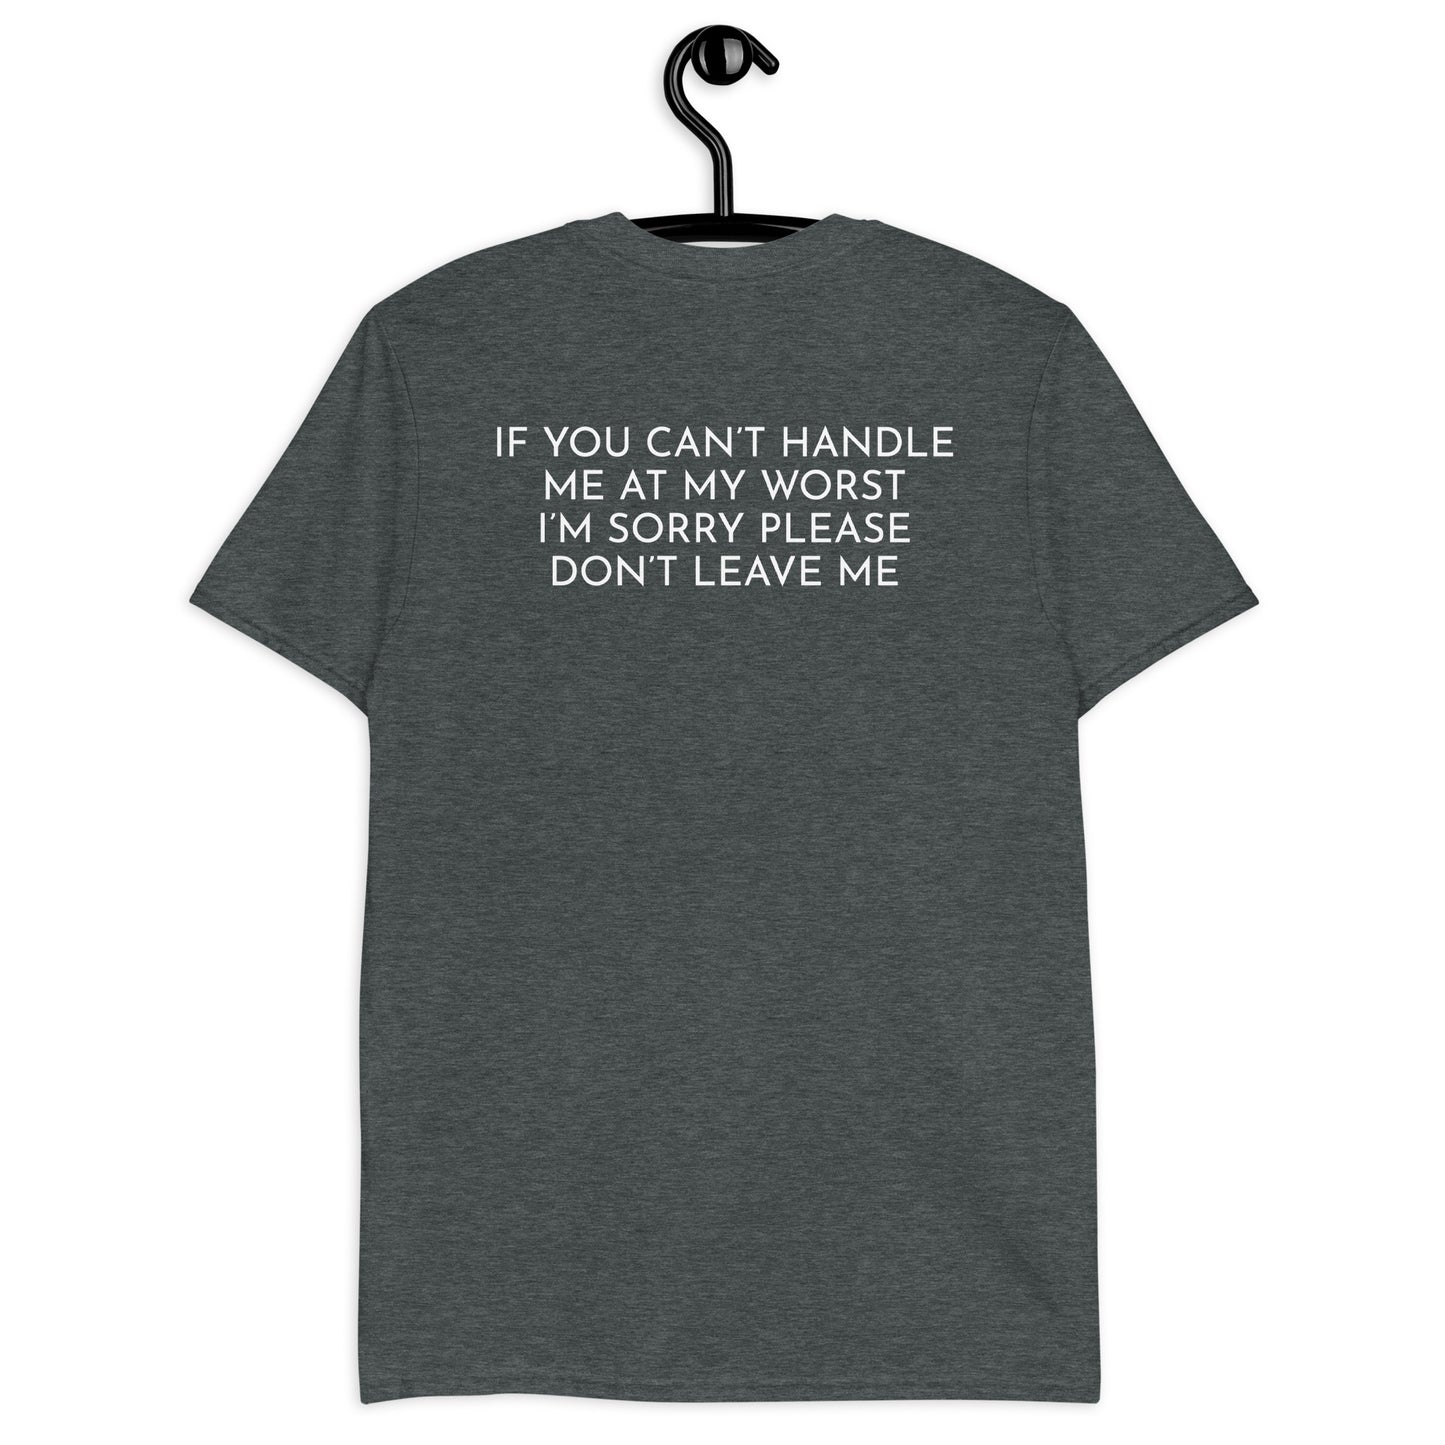 If you can't handle me at my worst, I'm sorry please don't leave me Unisex T-Shirt